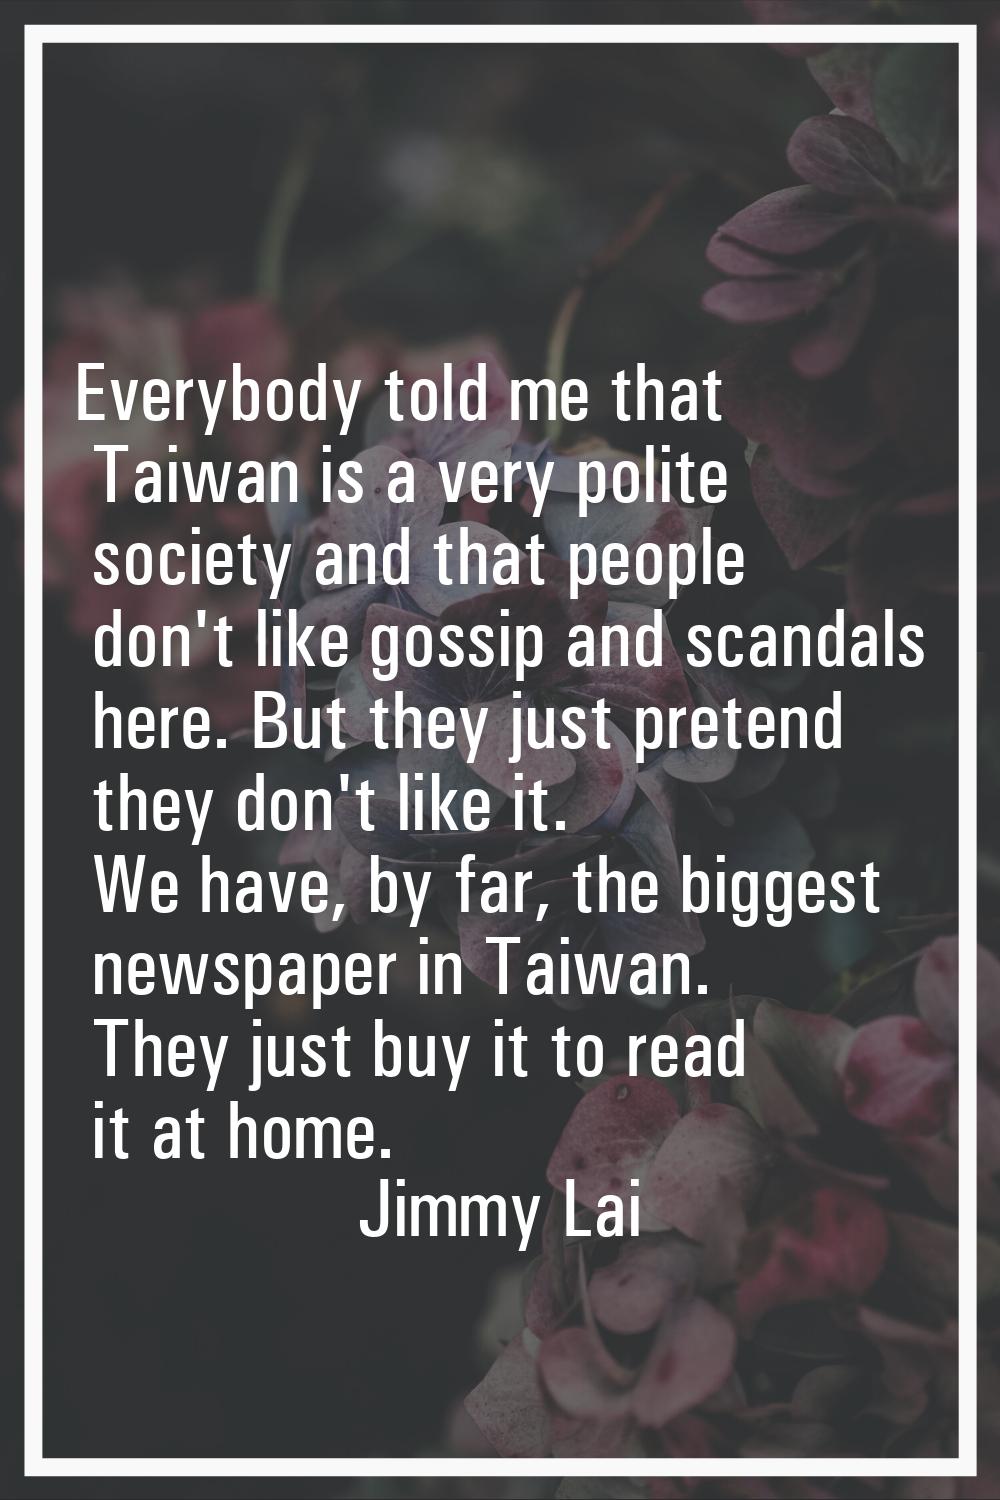 Everybody told me that Taiwan is a very polite society and that people don't like gossip and scanda